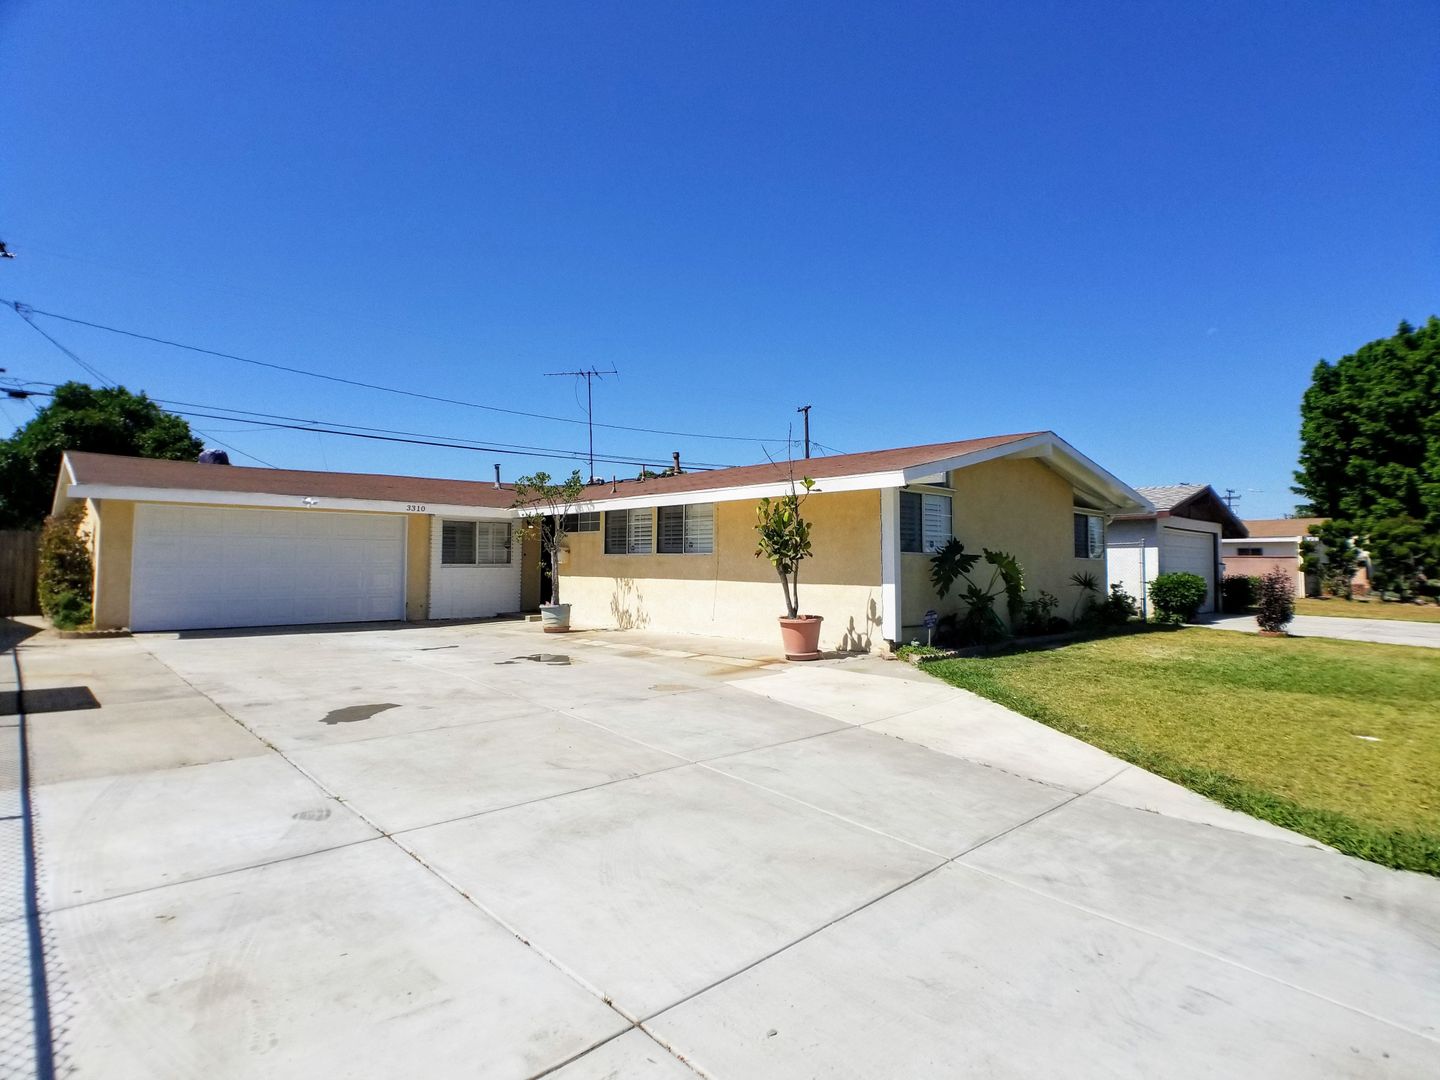 Property Listing for 07/20/2020